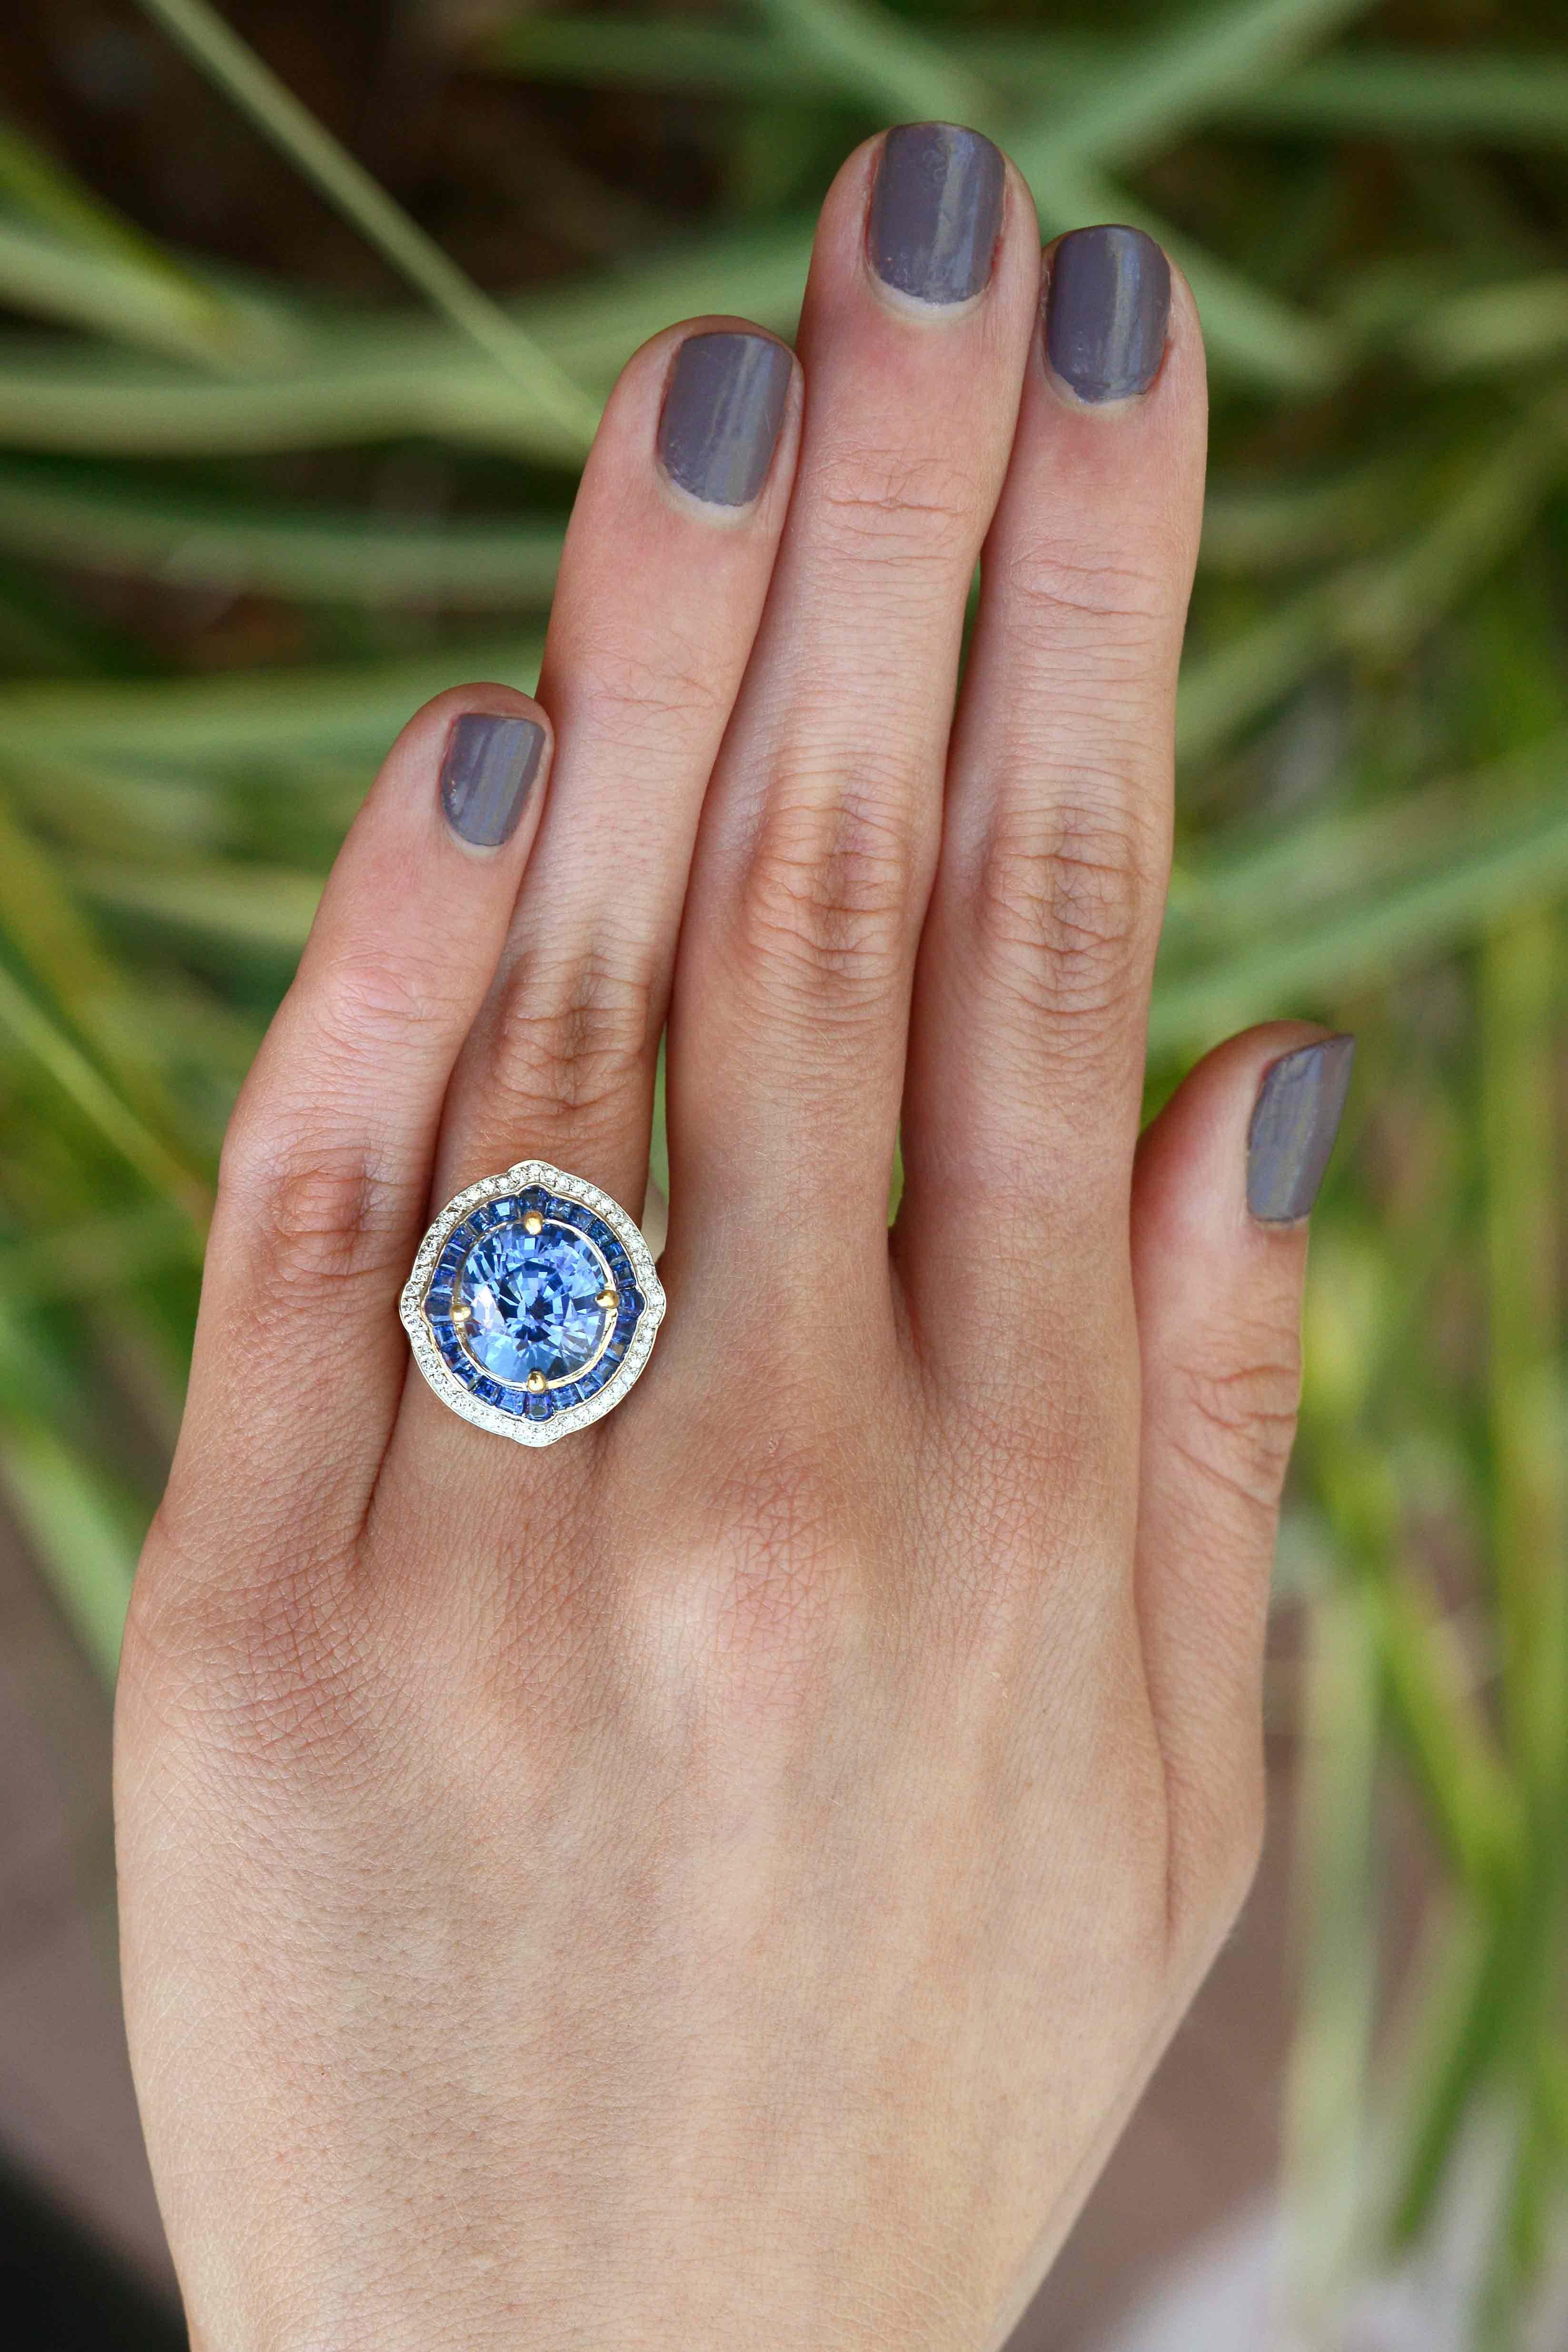 The Plano 7 carat GIA certified natural sapphire centering this magnificent engagement ring only tells part of it's story. With a mesmerizing Ceylon, cobalt blue and a captivating brilliance, this gemstone engagement ring has an almost unbelievable